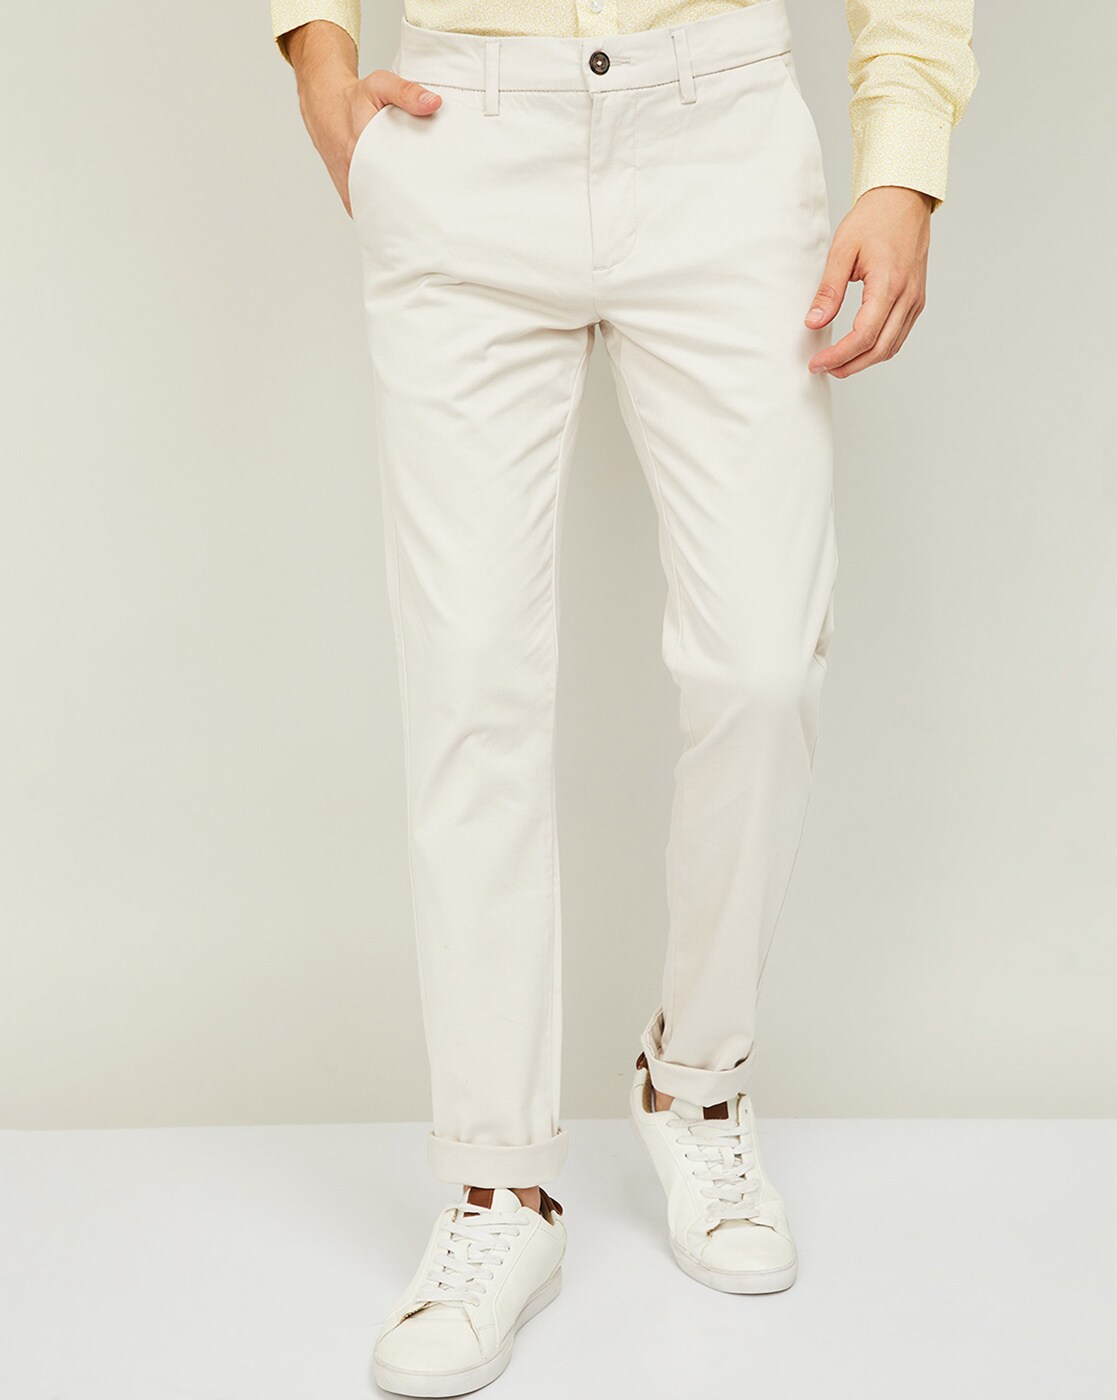 Buy White Trousers  Pants for Men by CODE by Lifestyle Online  Ajiocom